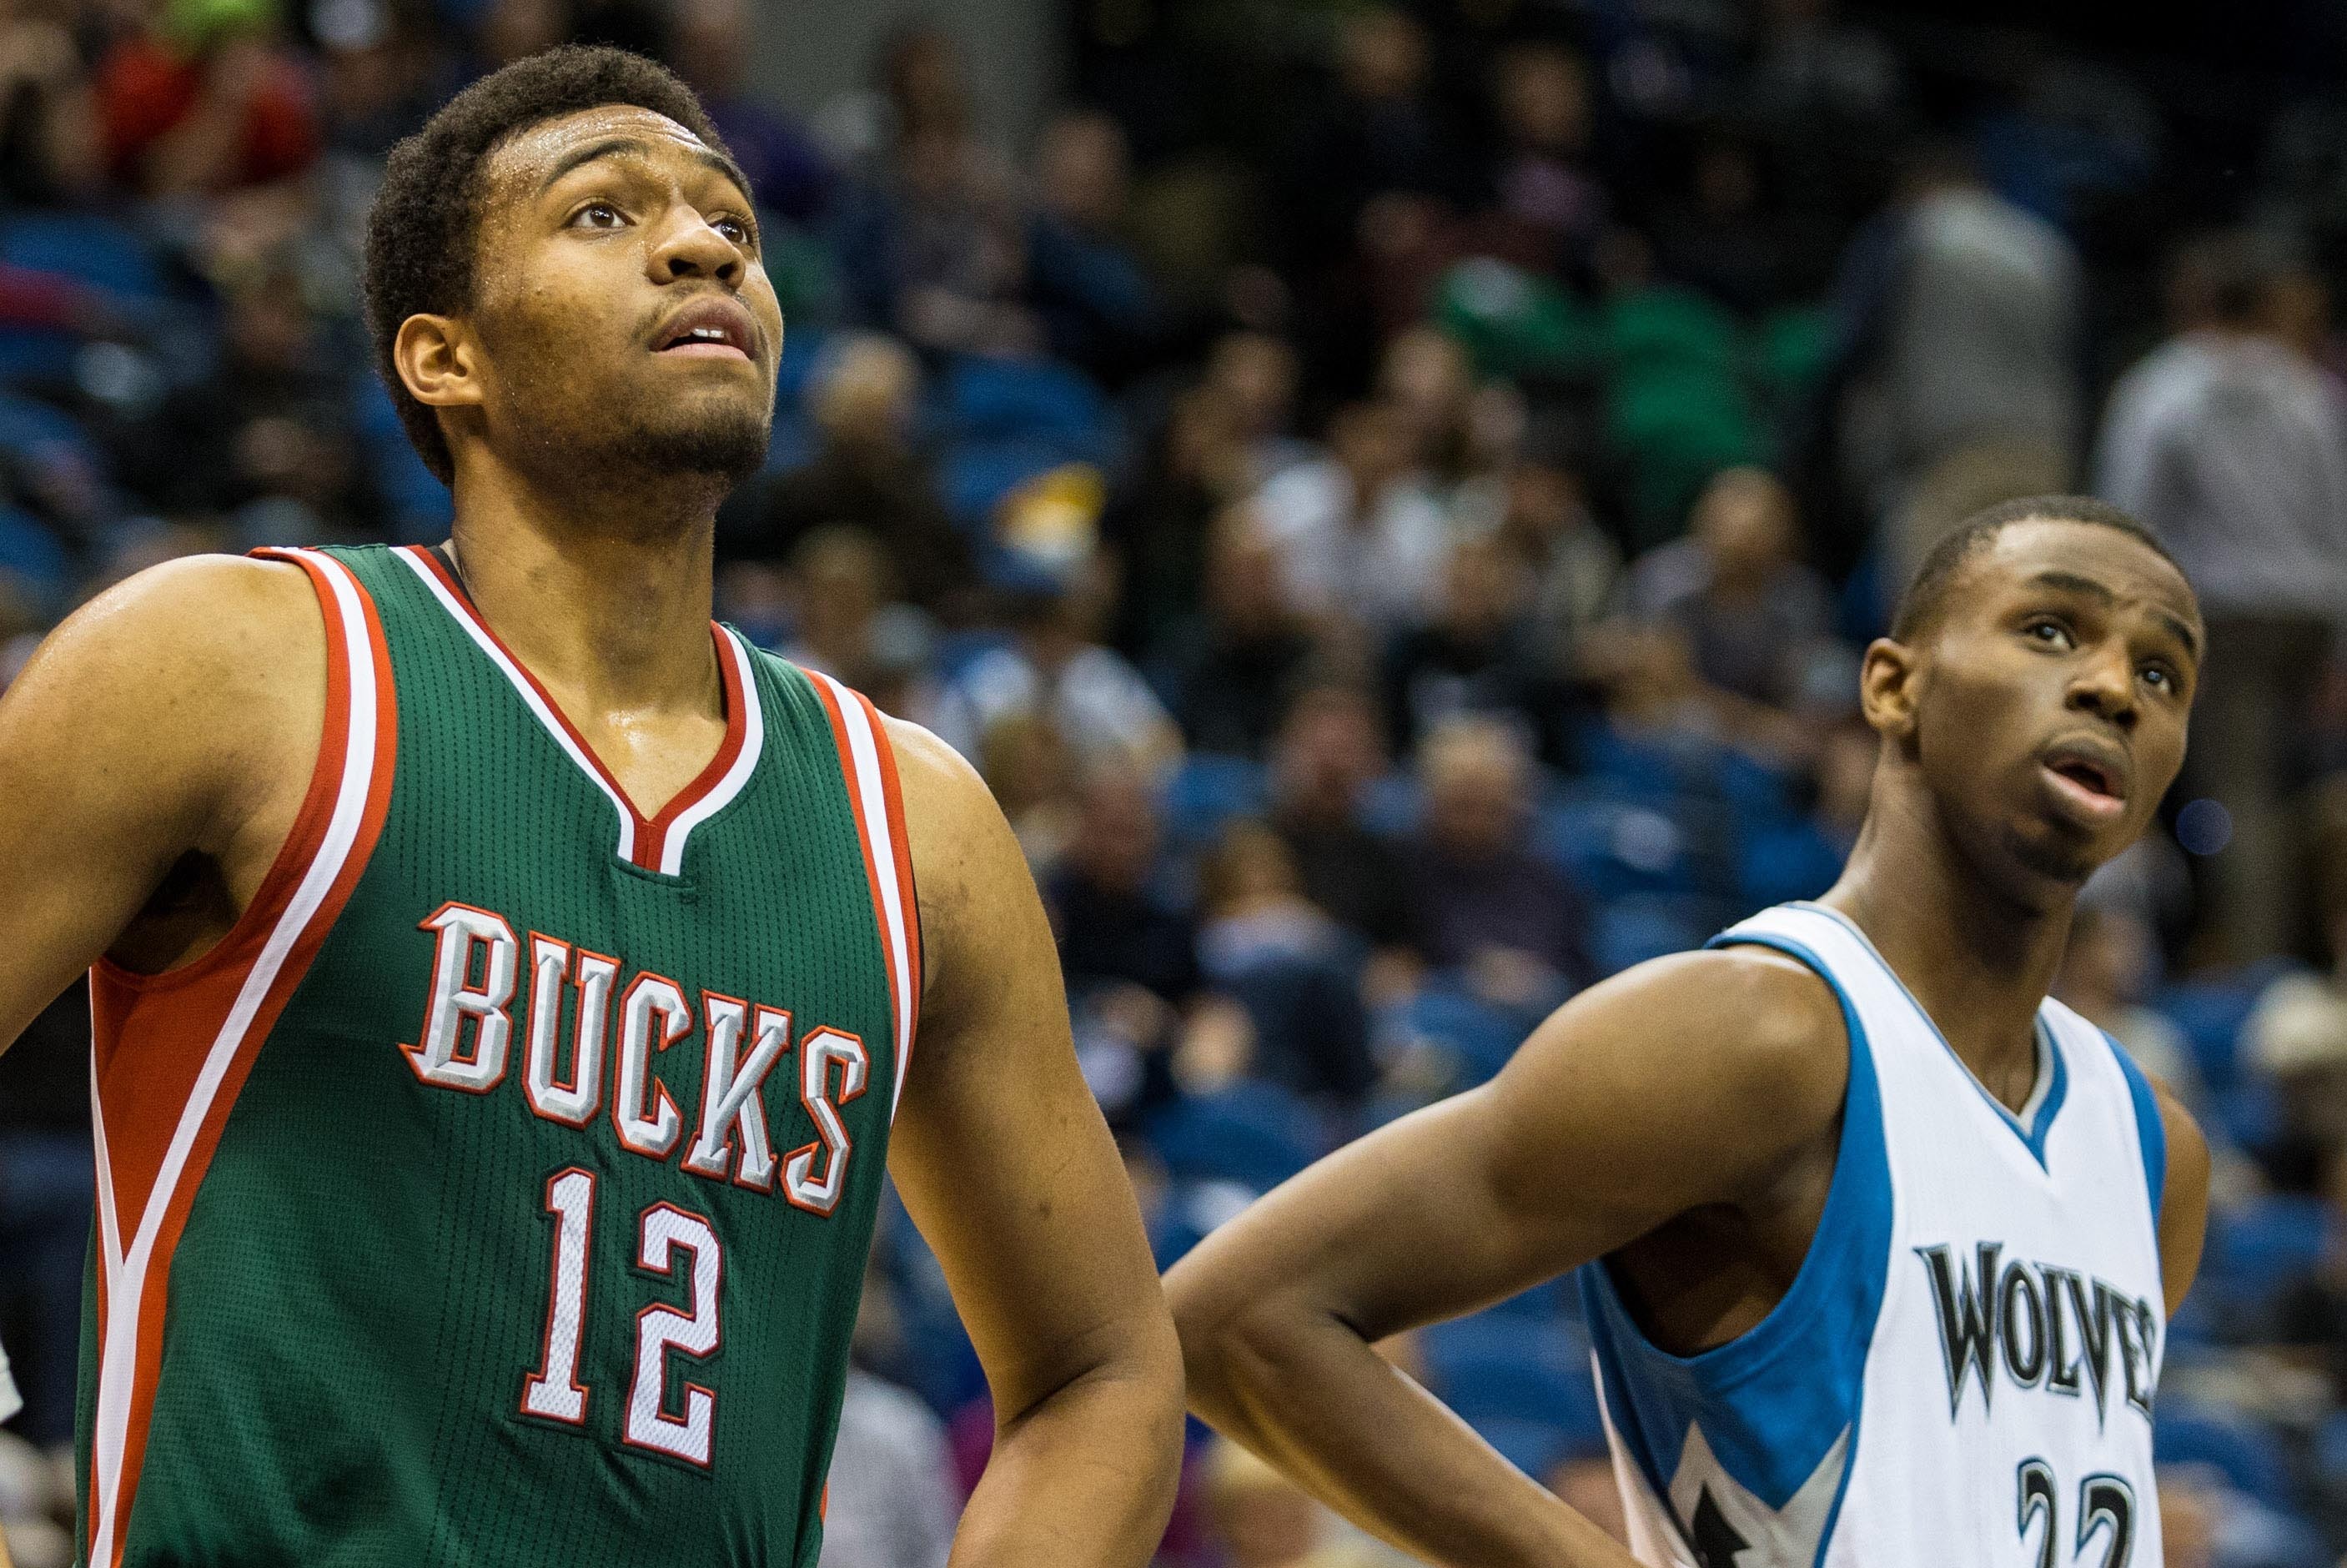 Jabari Parker puts on first of likely many great performances at